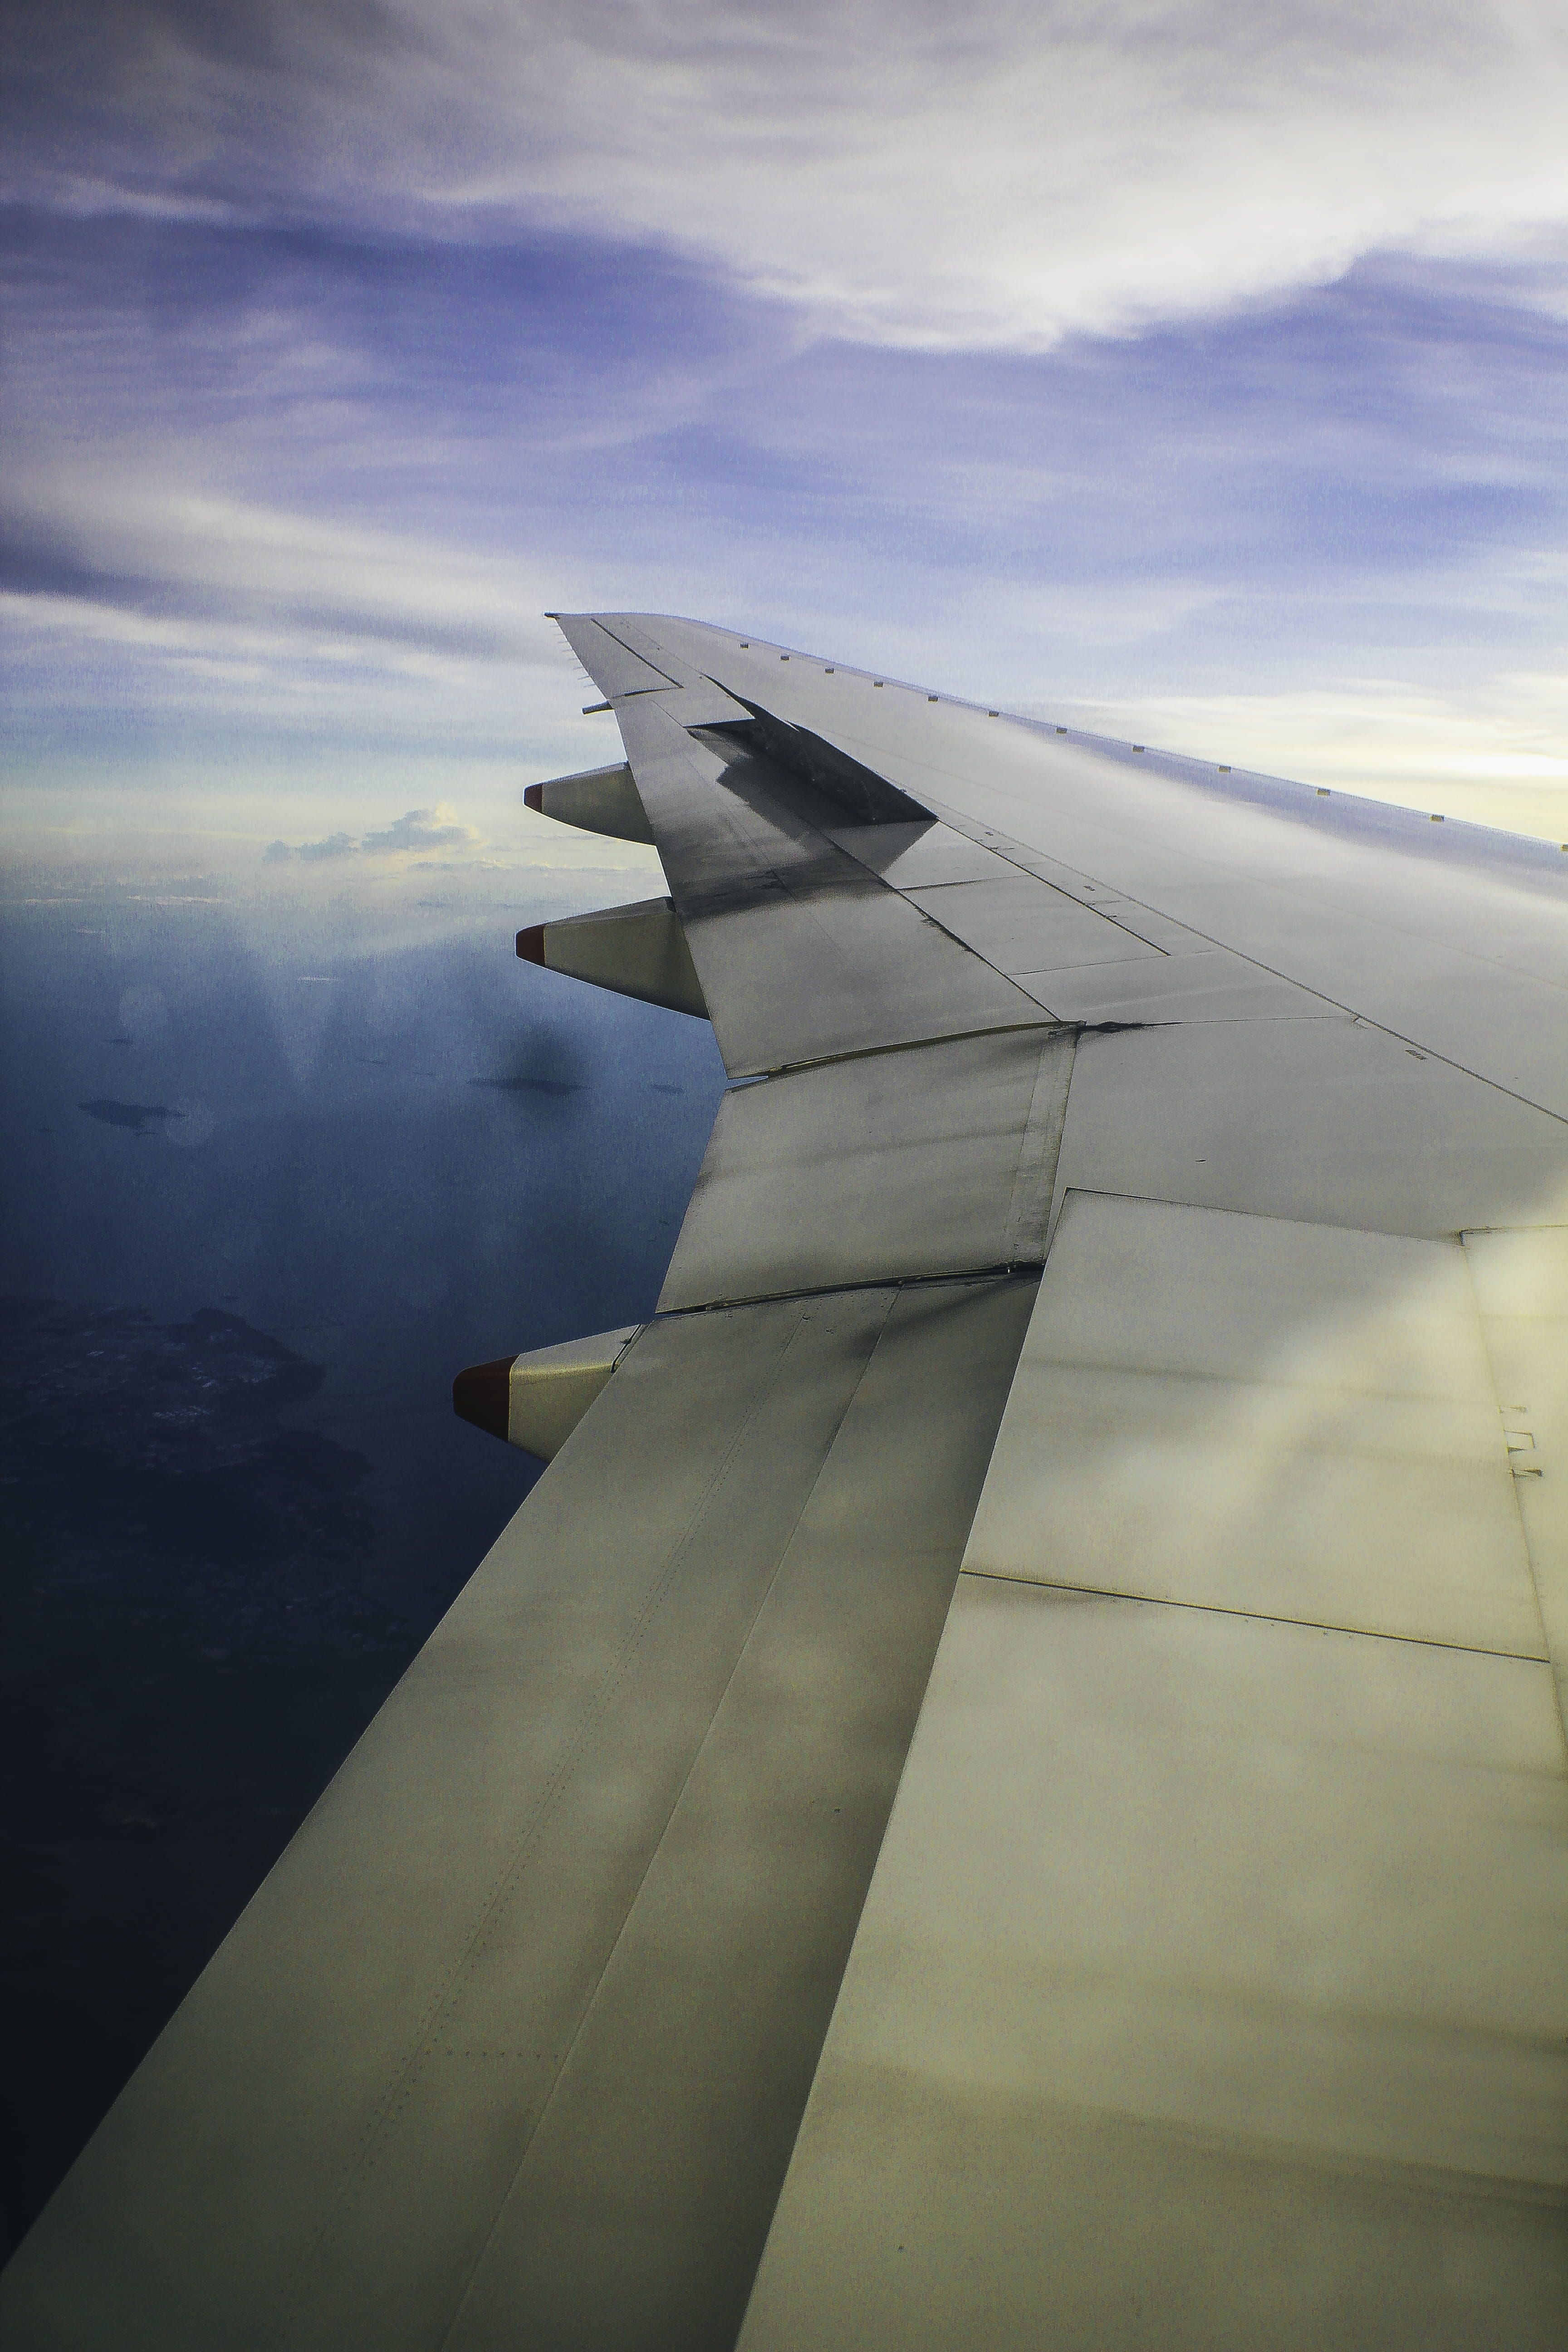 A wing of an airplane flying over the ocean - Wings, airplane